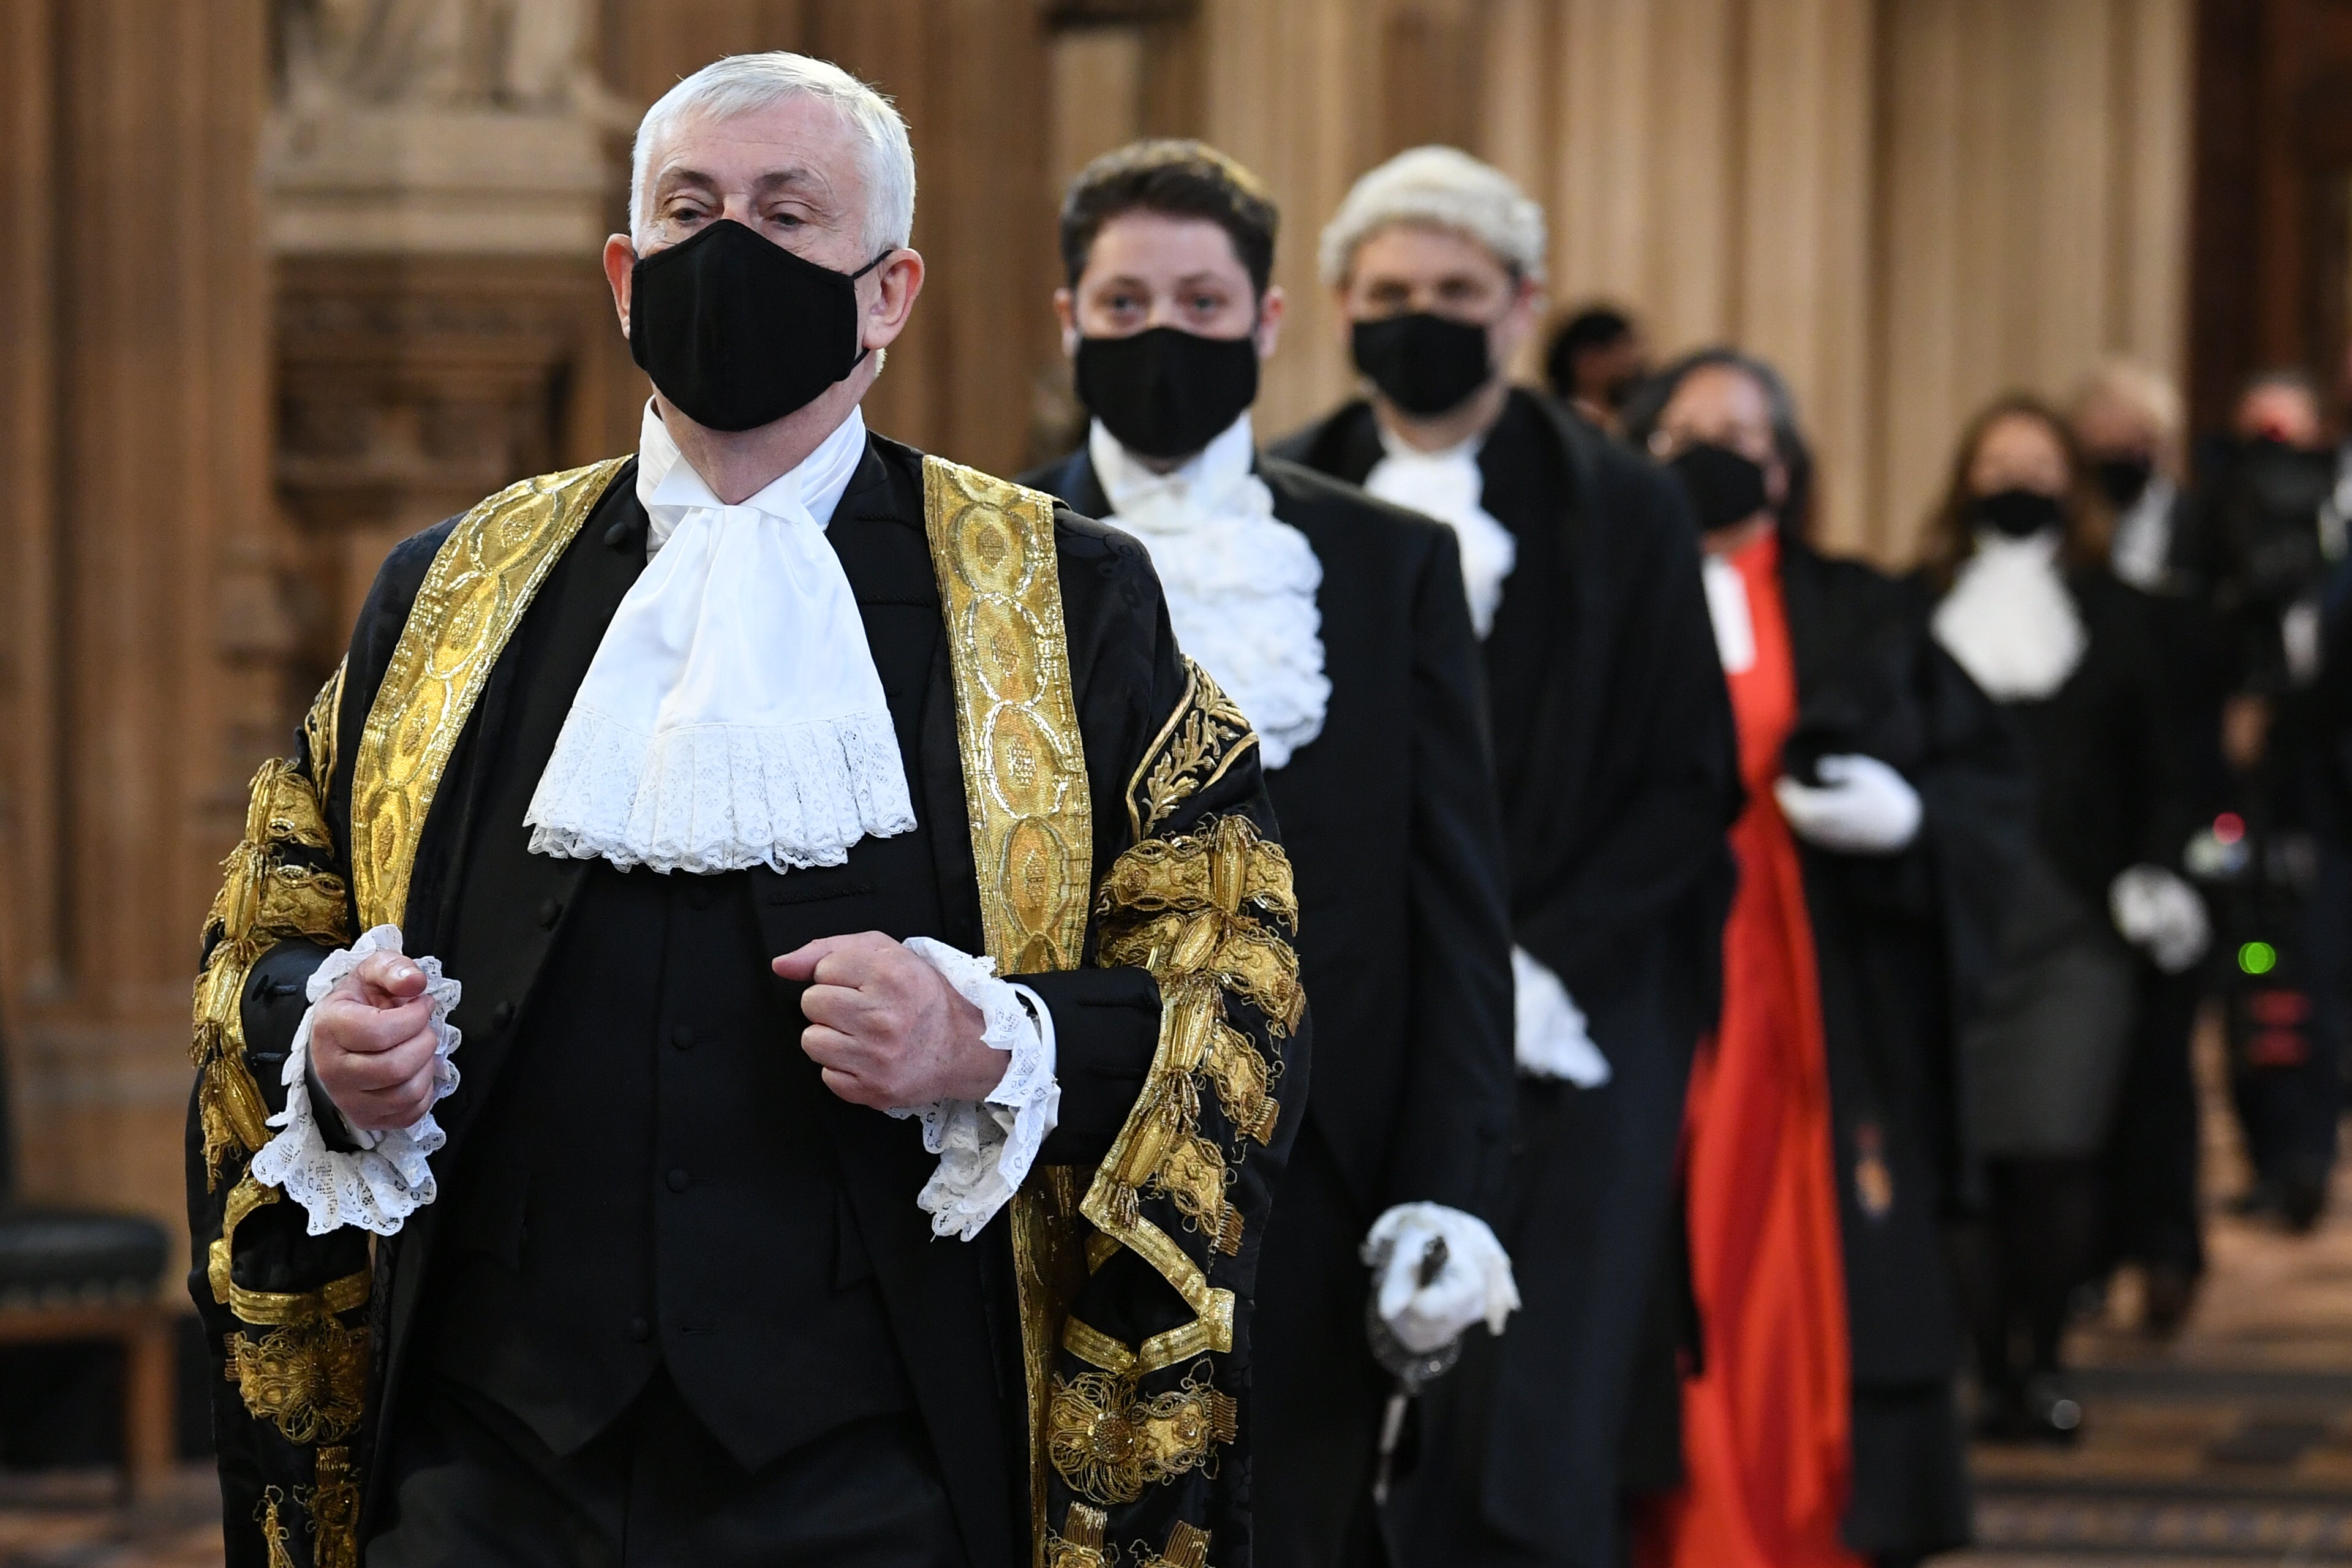 Sir Lindsay Hoyle has asked for returning MPs to smarten up their outfits